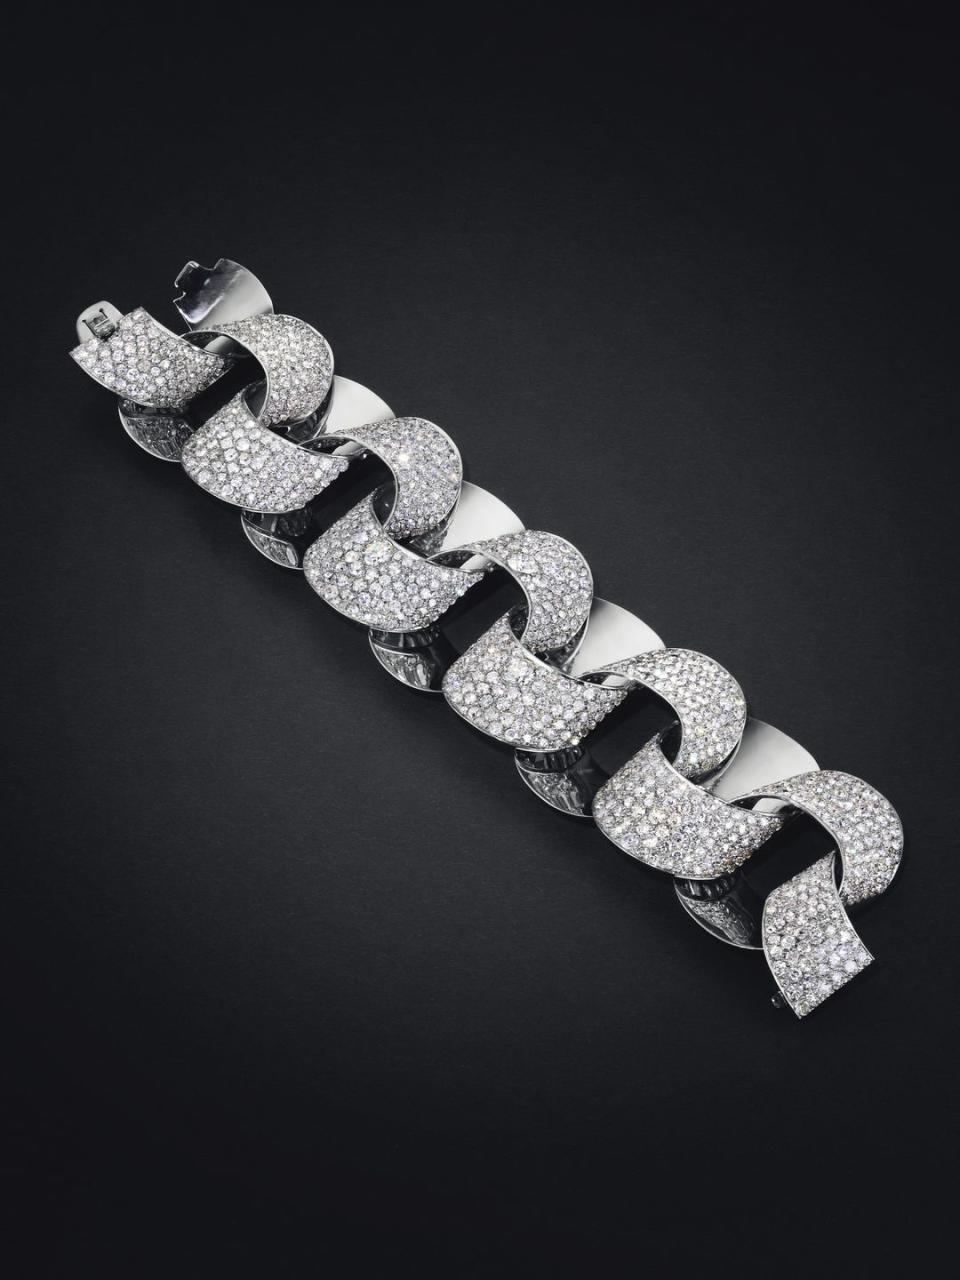 <p>The competition was particularly fierce at Christie's, where-after six and a half minutes of tense bidding-a diamond "tube" bracelet by Suzanne Belperron set a world record auction for the designer, at $852,500.</p>